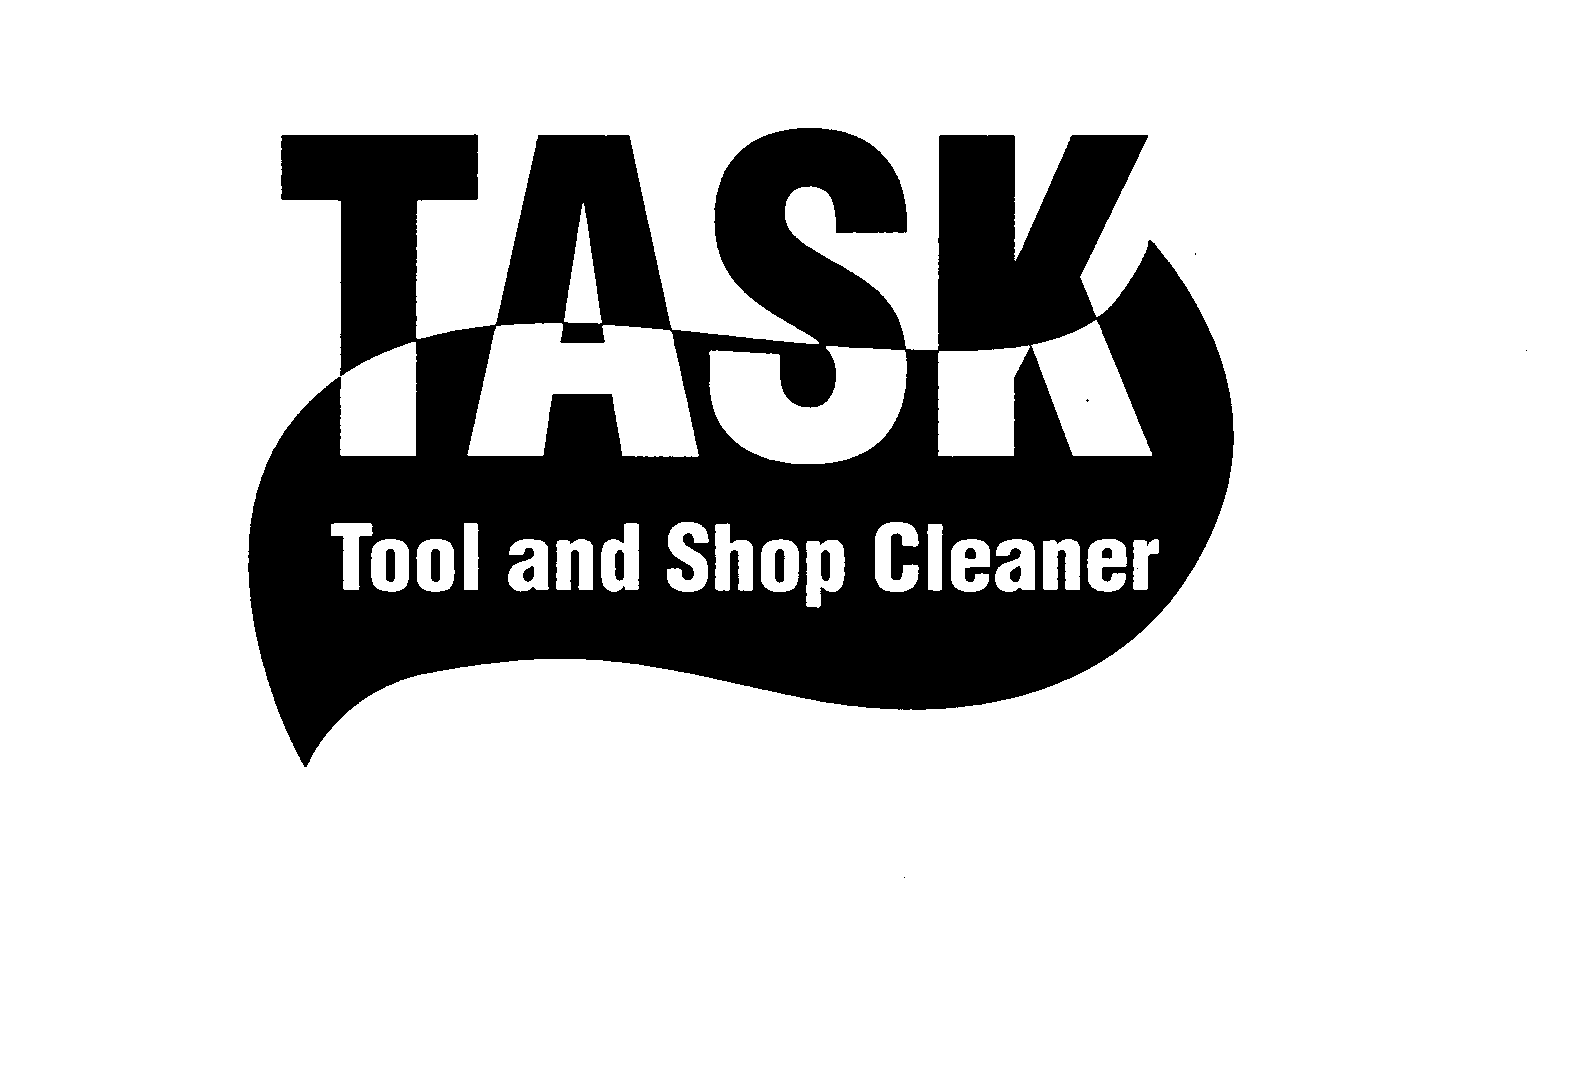  TASK TOOL AND SHOP CLEANER